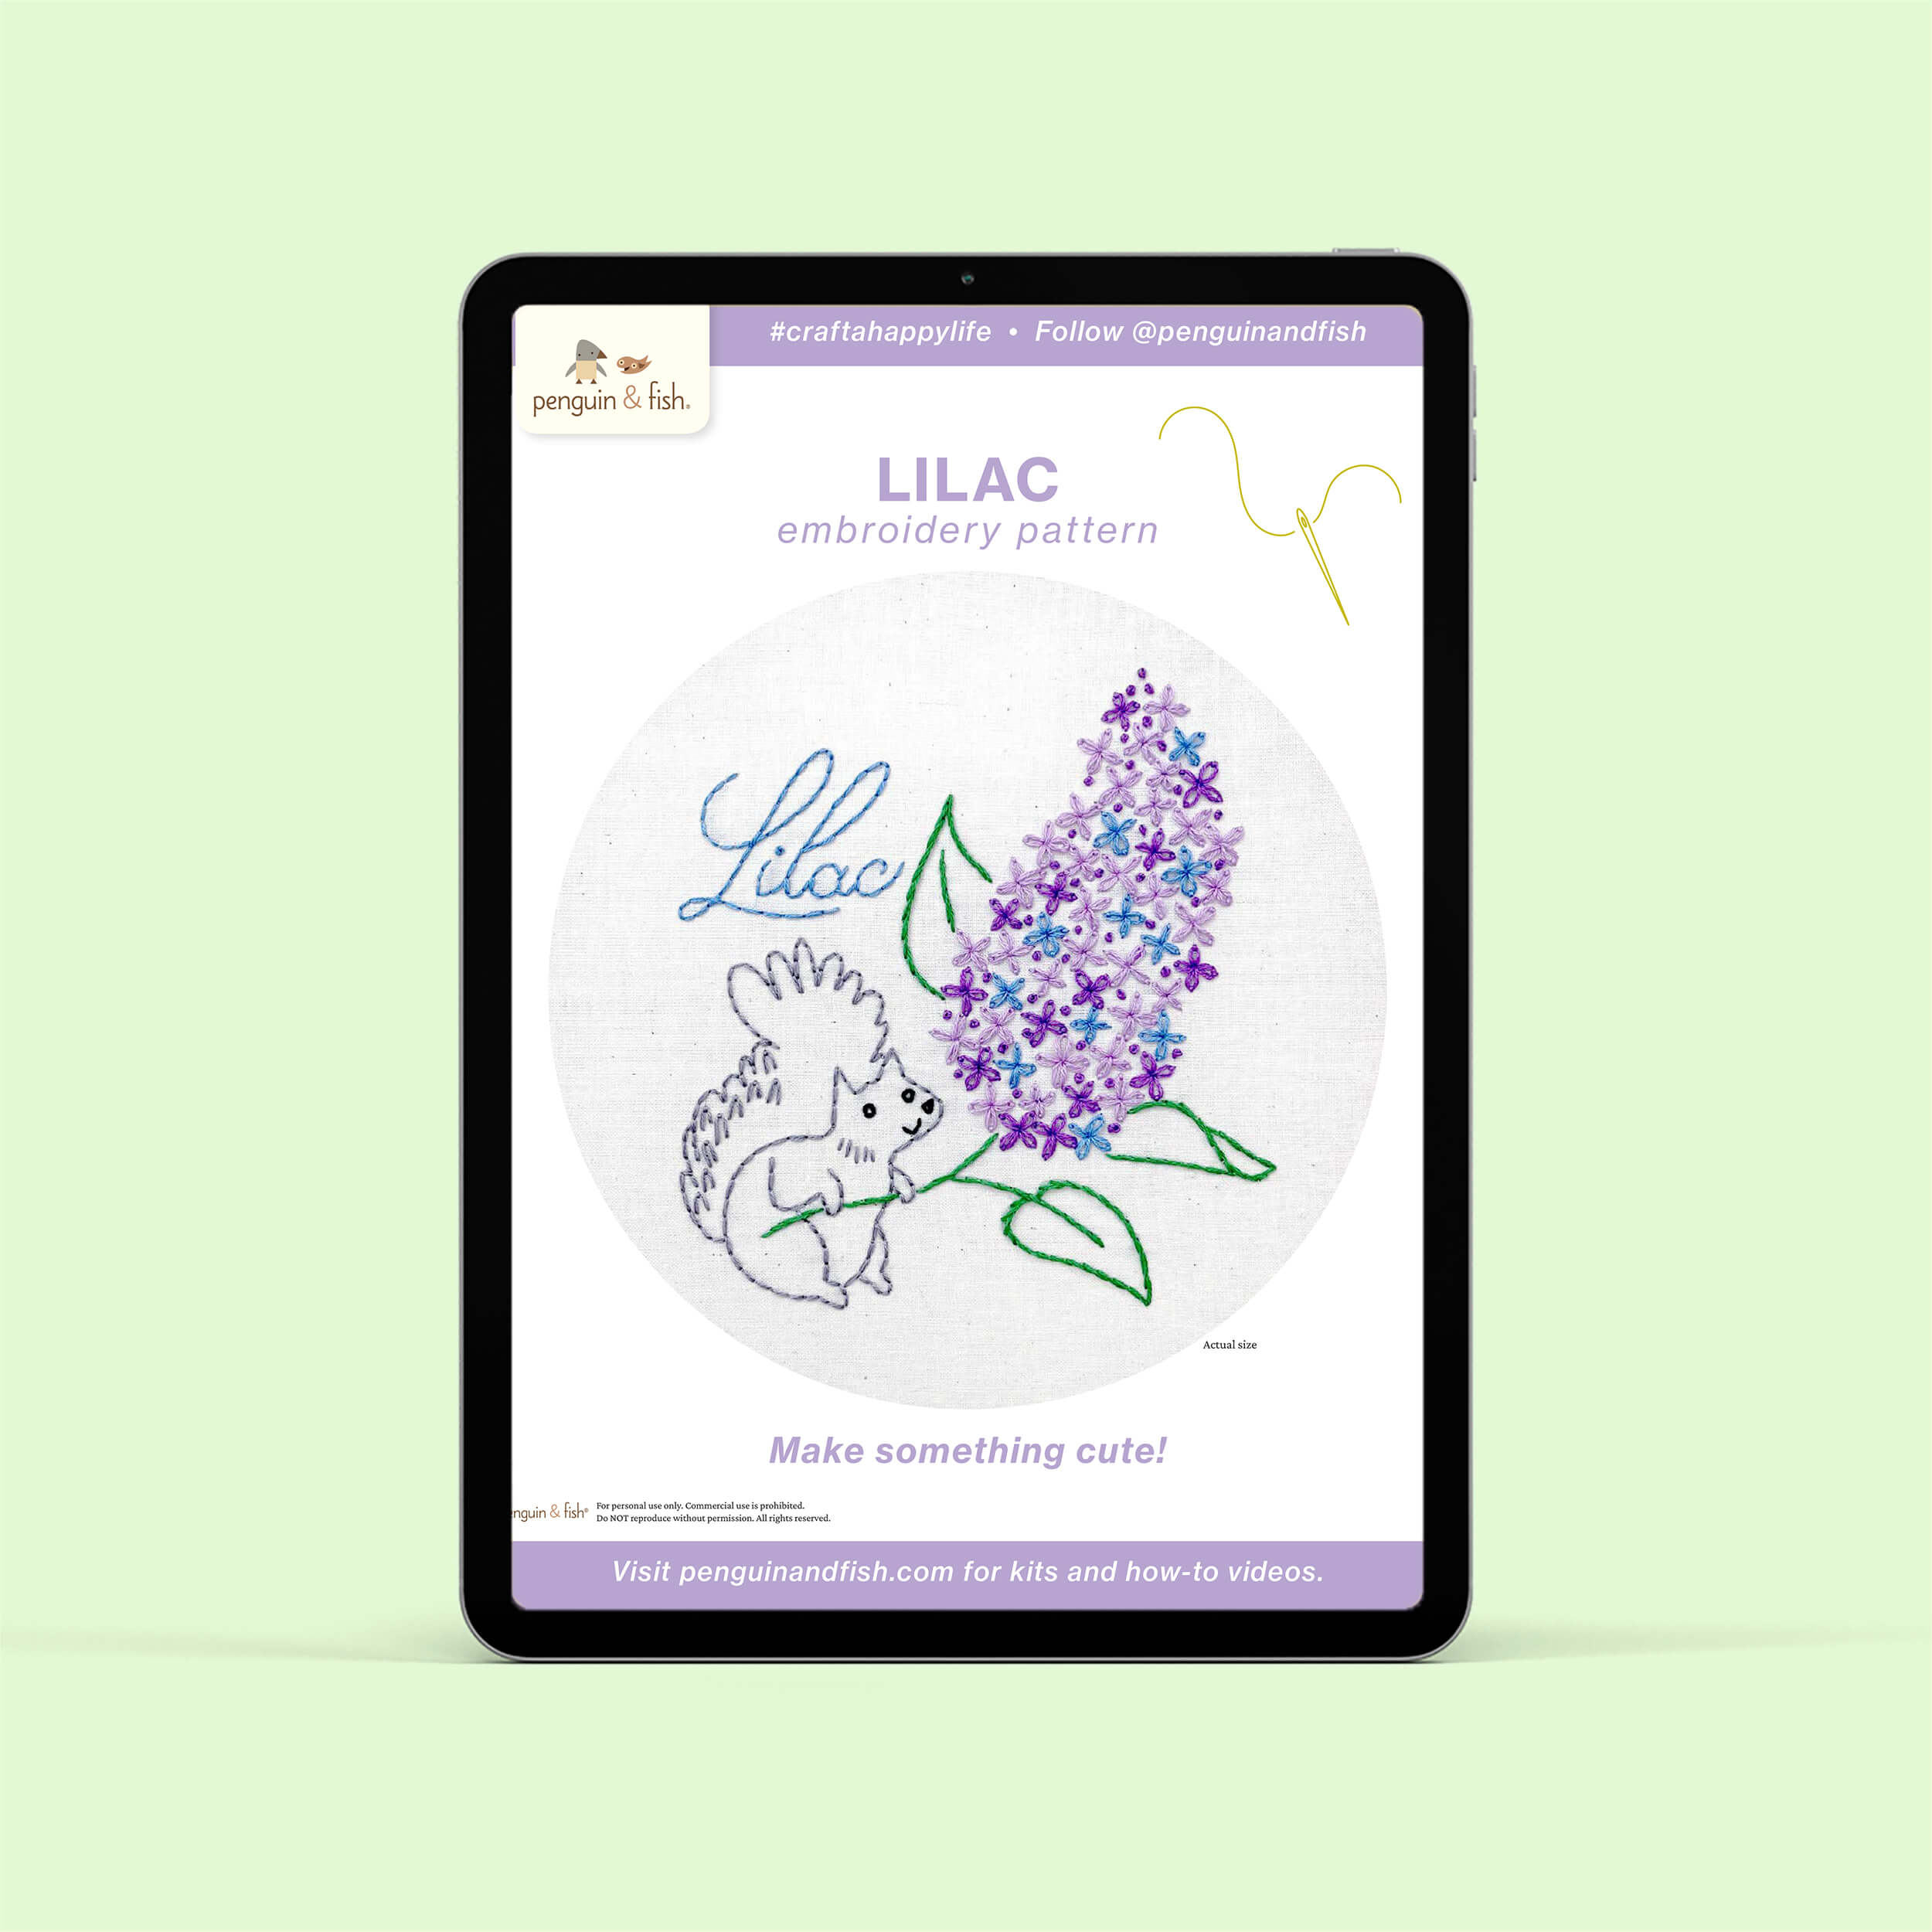 Lilac PDF embroidery pattern shown on a tablet